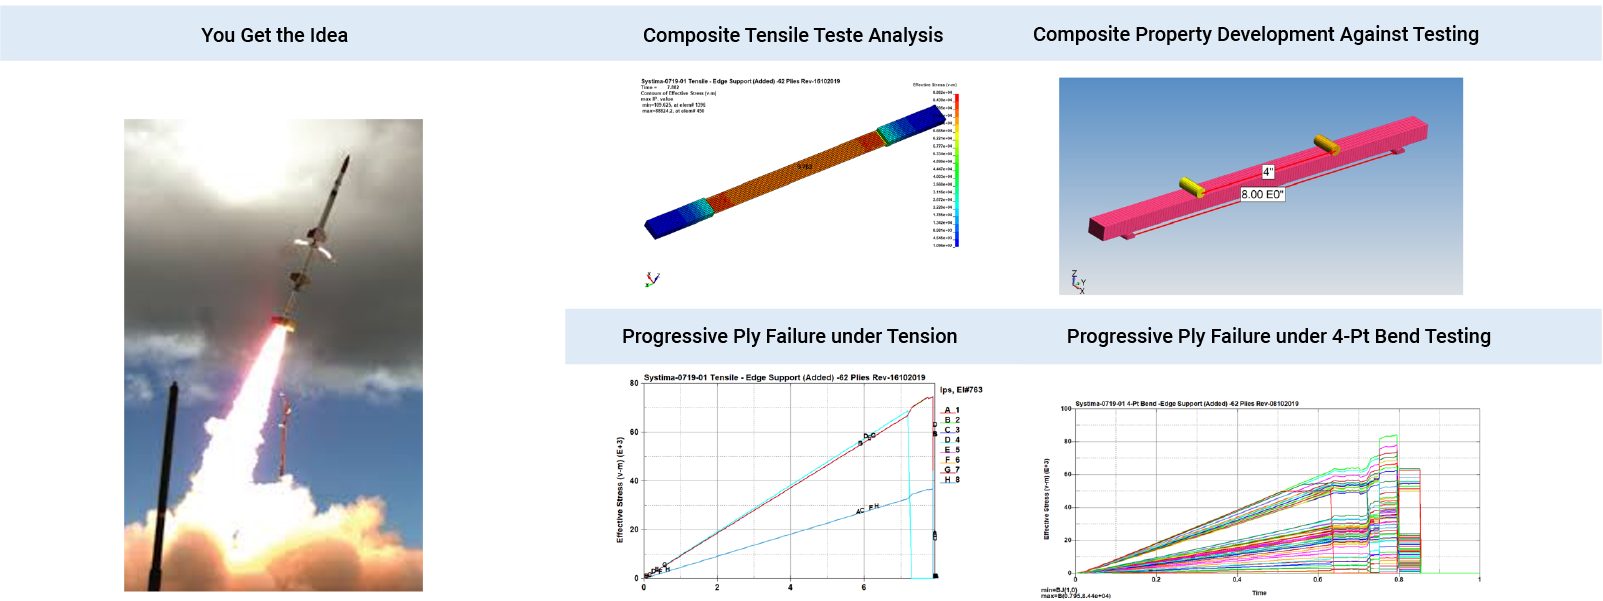 Advanced Composite Analysis with Progressive Ply Failure from Experimental Data to Validation - FEA Consulting Services